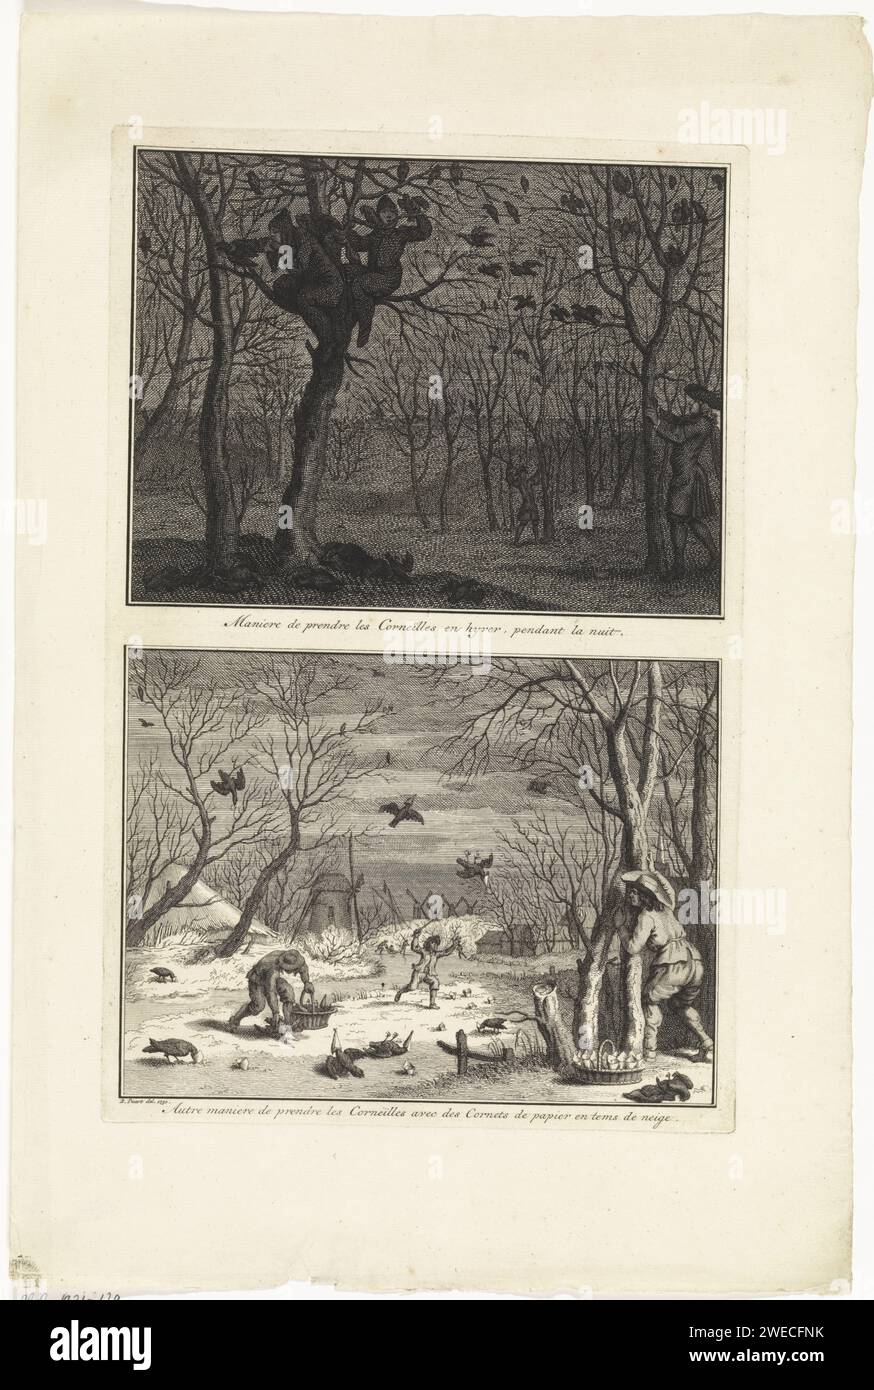 Ways to catch crows in winter, Bernard Picart (workshop or), After Bernard Picart, 1730 print Two performances on a leaf. Upstairs: Men in dark suits catch crows in the trees at night. Below: catching crows with papers's cones in the snow. Amsterdam paper etching bird hunting. finch trap, finchery. song-birds: crow Stock Photo